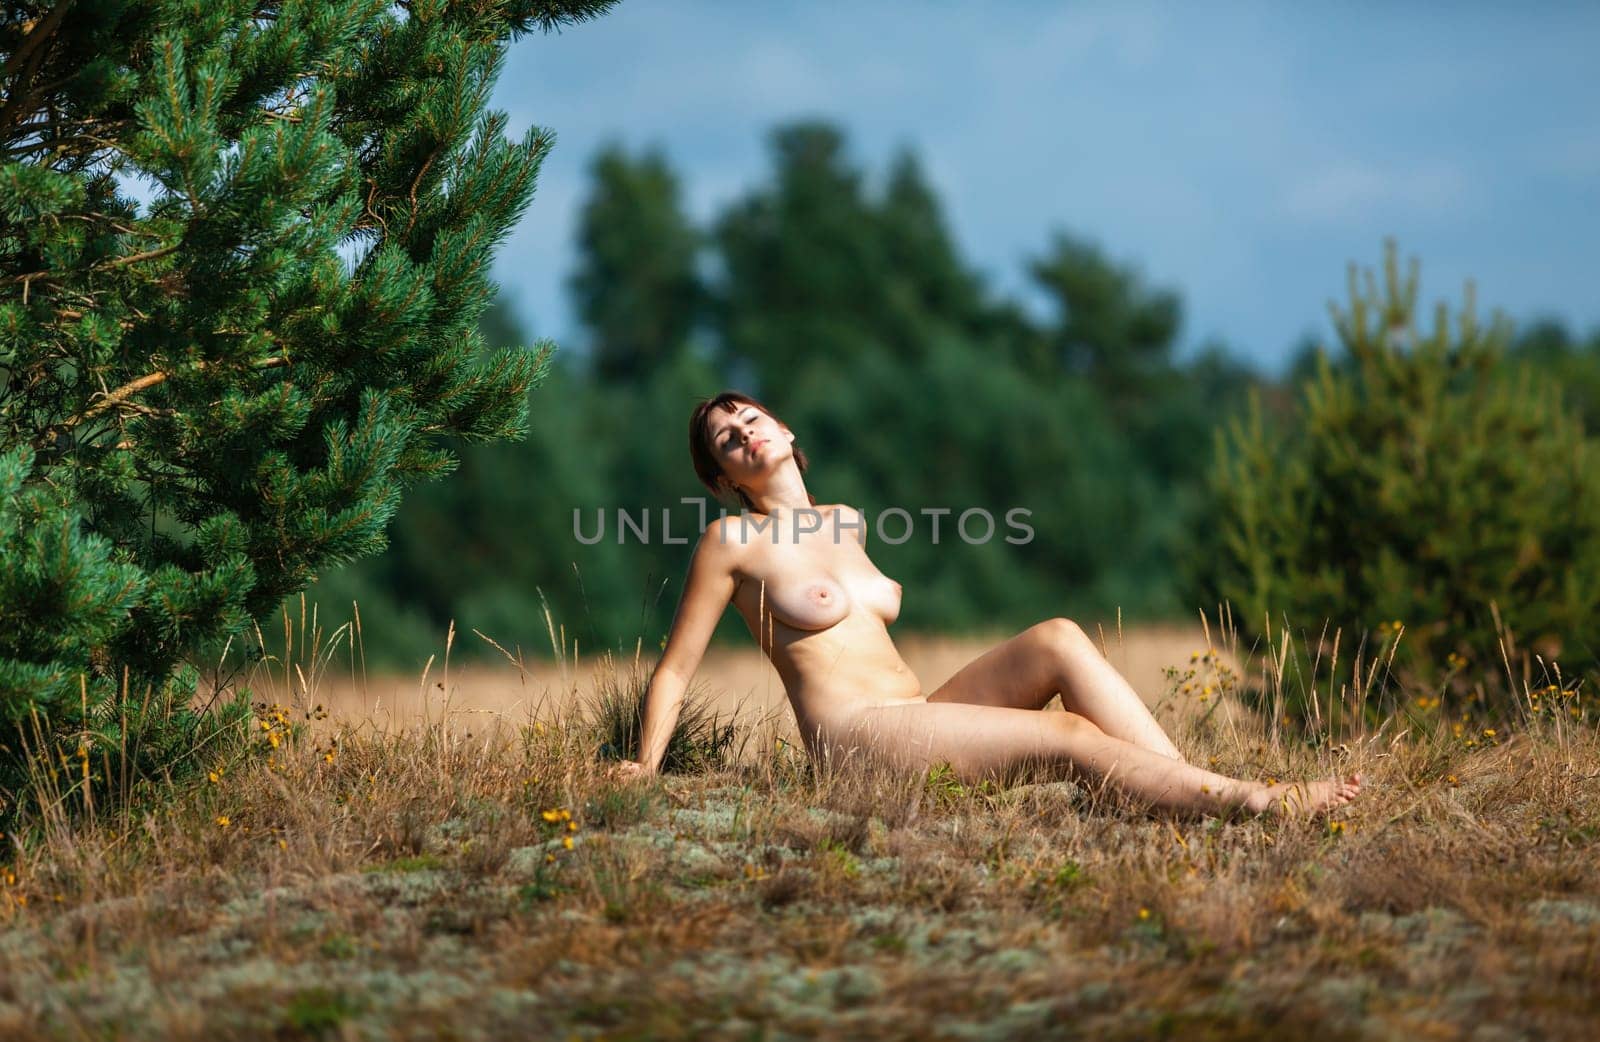 Youth, beauty and nudity. Young naked woman sunbathing on a forest glade among young pine trees